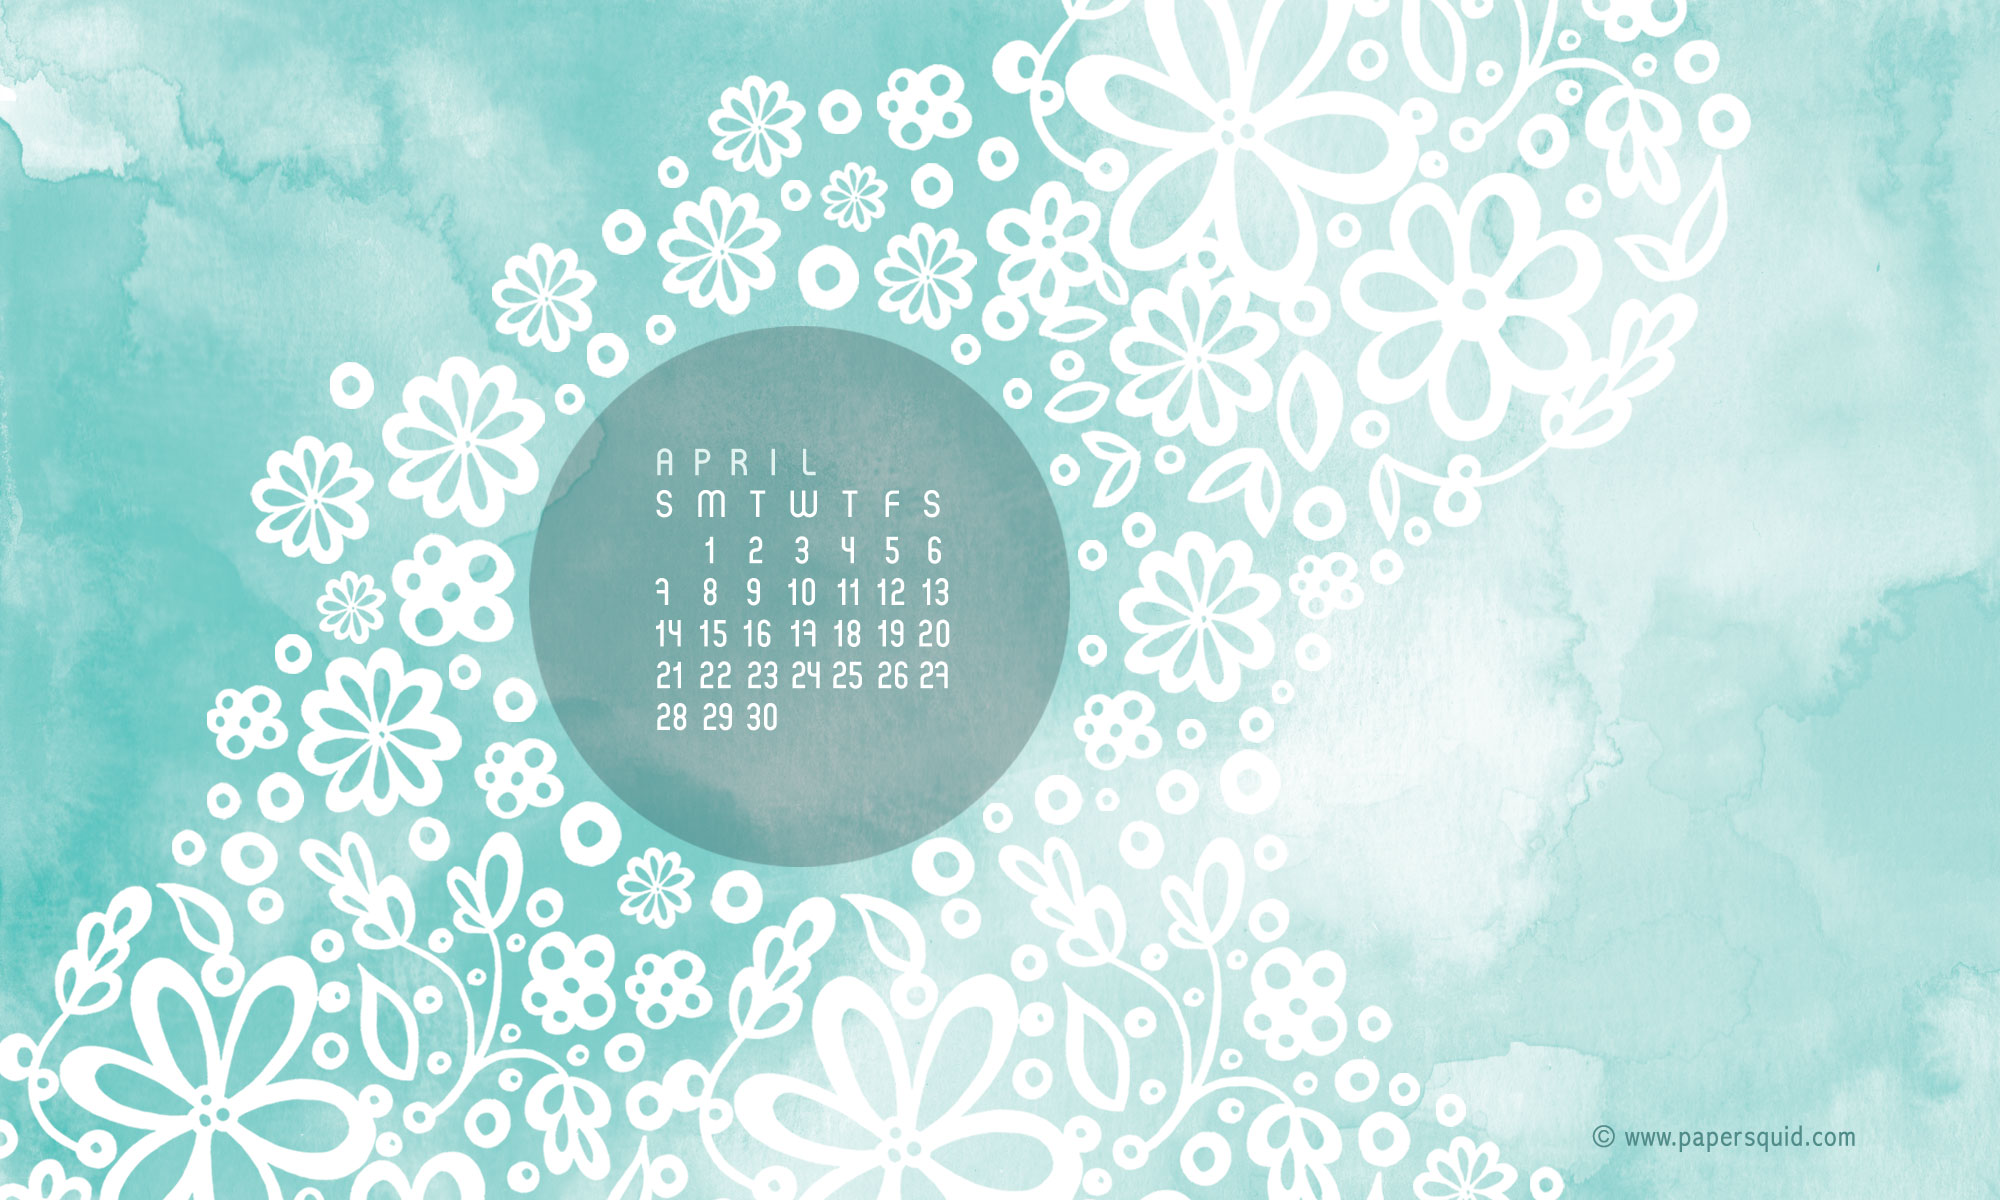 As promised Ive started a monthly desktop wallpaper calendar that I 2000x1200